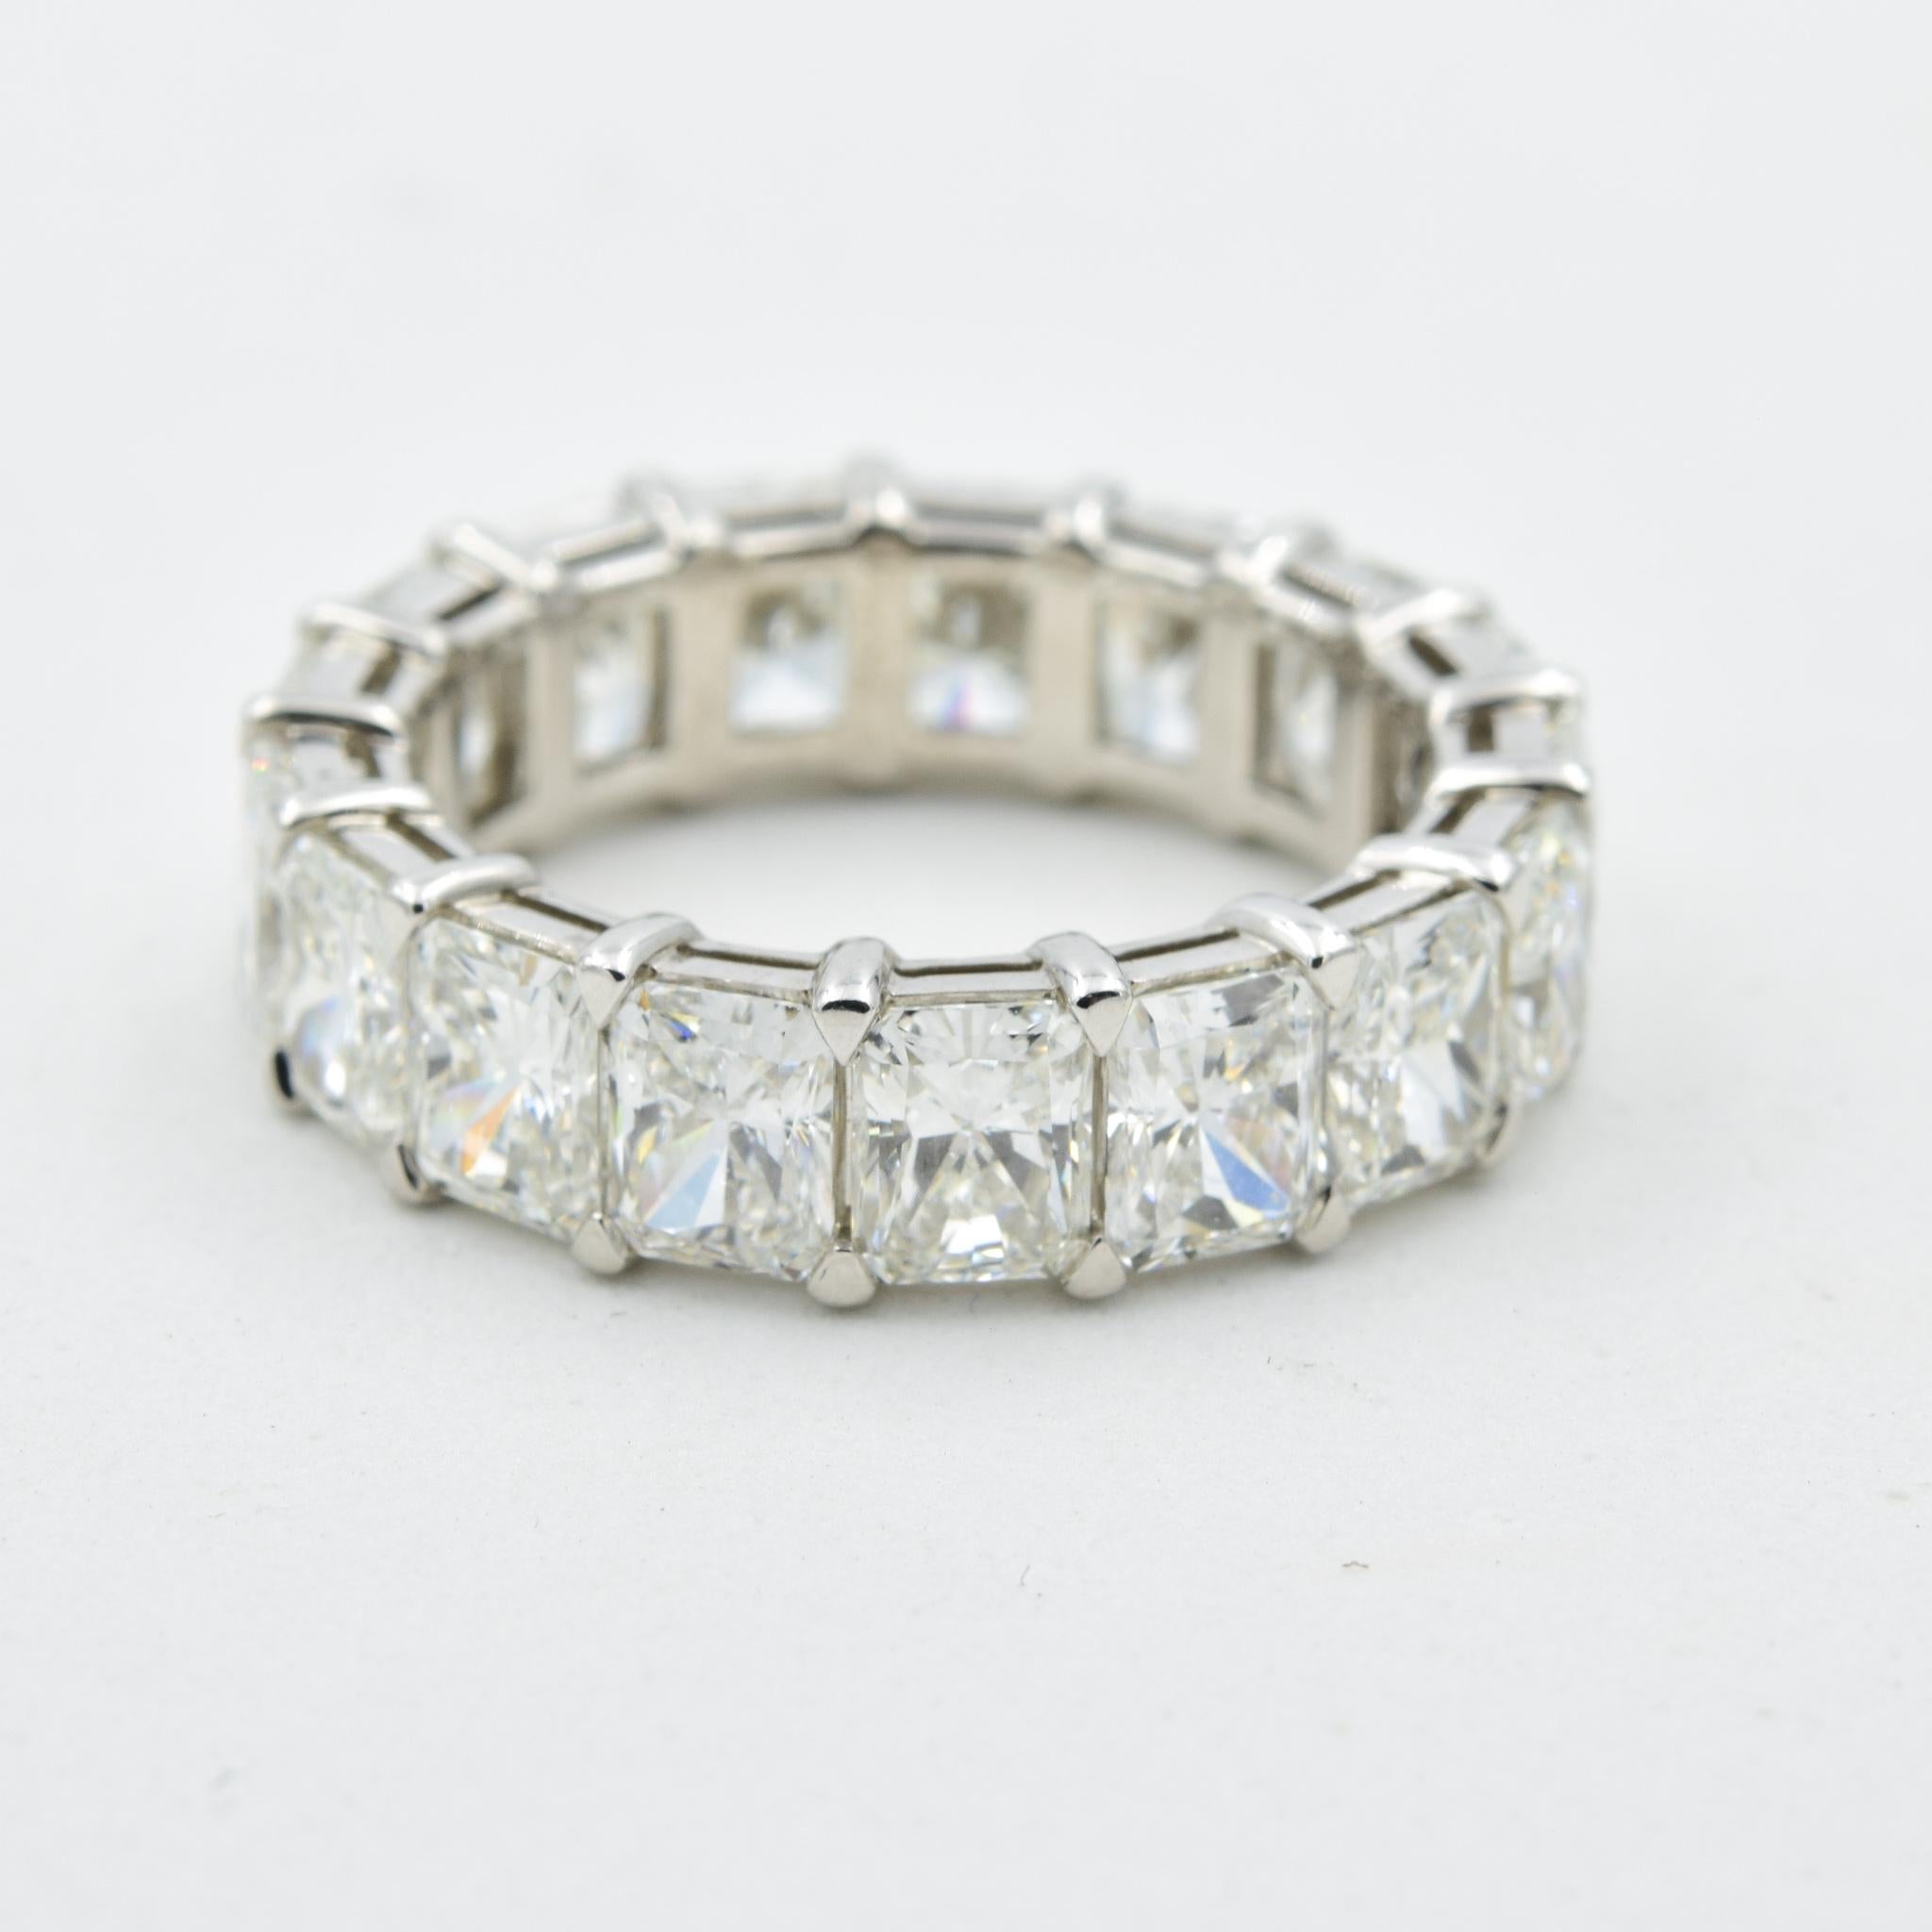 Radiant Cut 7.15 Carat Radiant Diamond Eternity Band by Norman Silverman in Platinum